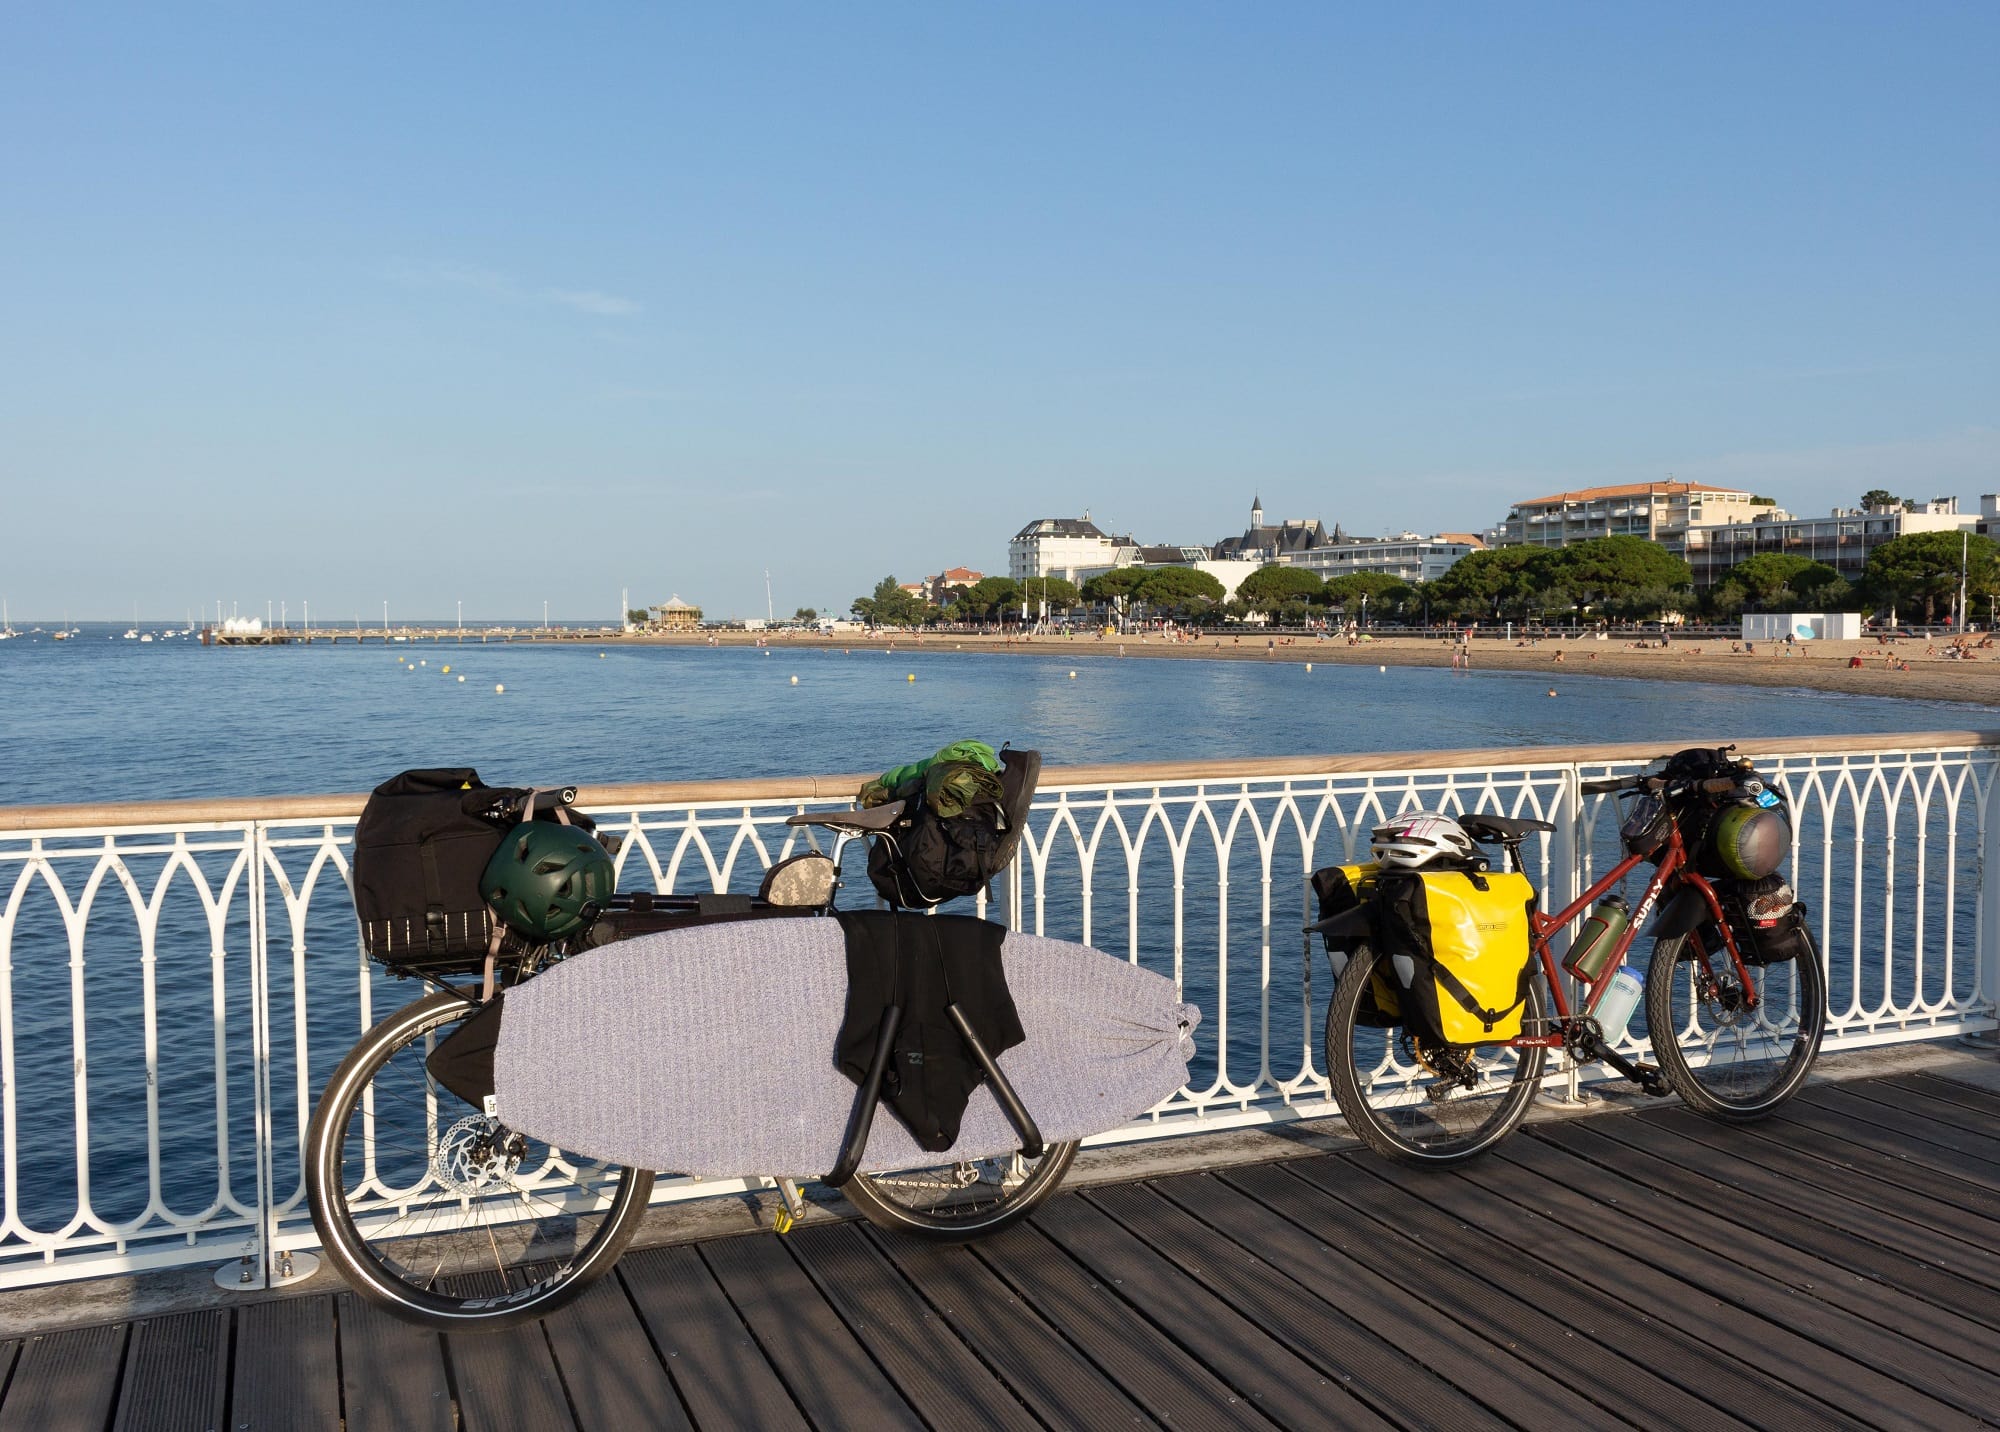 Two bikes loaded with bike touring gear leaning against railing with ocean bay in background